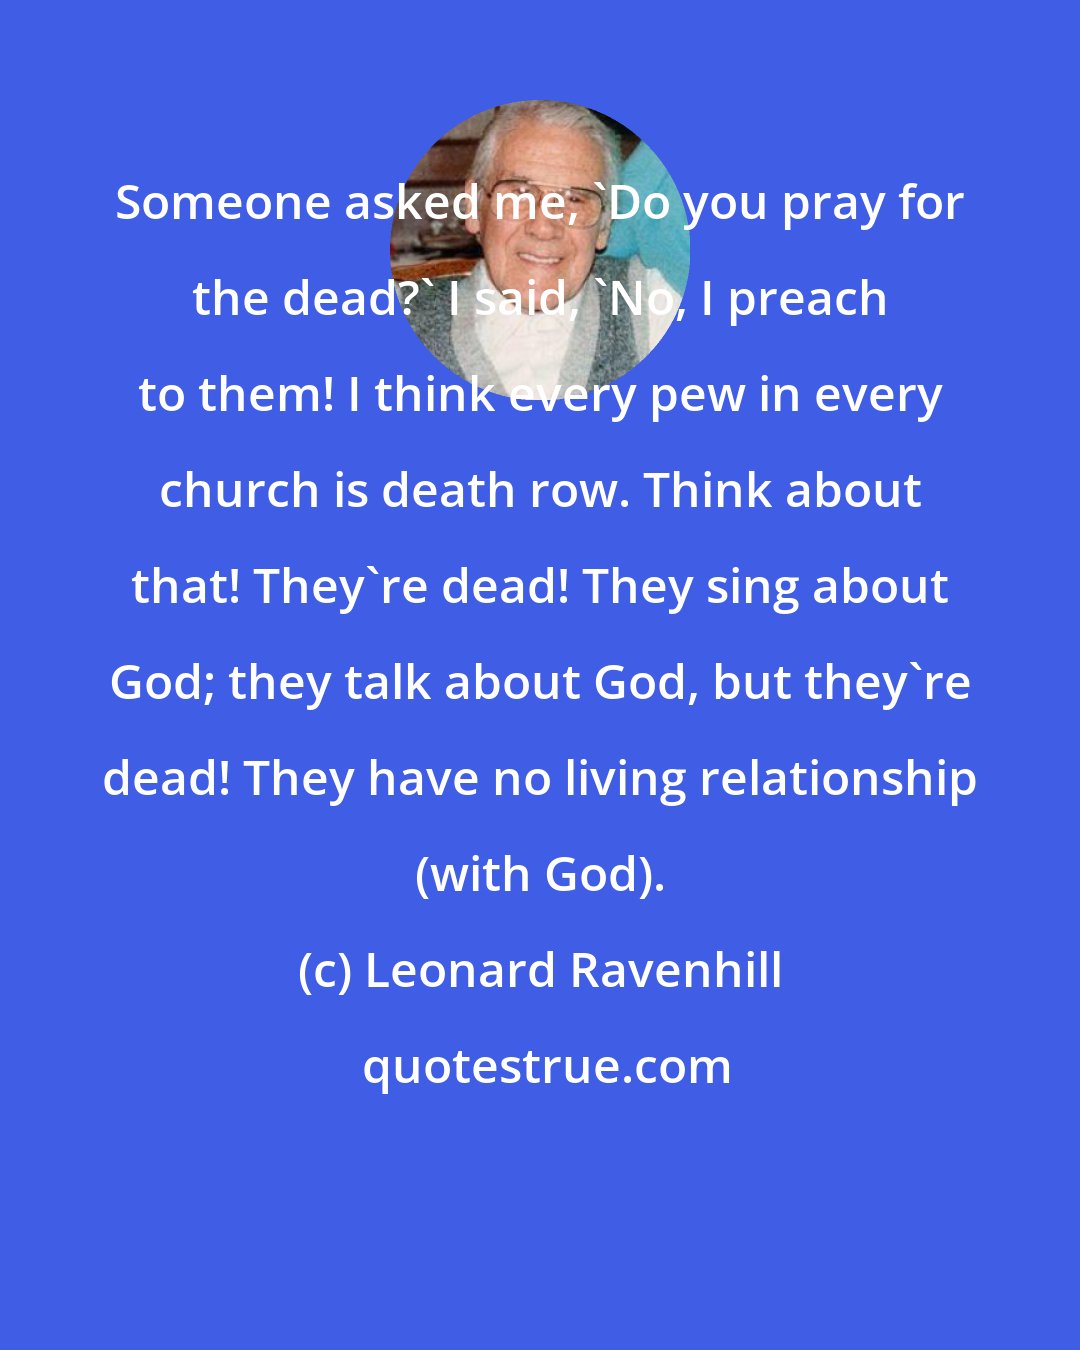 Leonard Ravenhill: Someone asked me, 'Do you pray for the dead?' I said, 'No, I preach to them! I think every pew in every church is death row. Think about that! They're dead! They sing about God; they talk about God, but they're dead! They have no living relationship (with God).